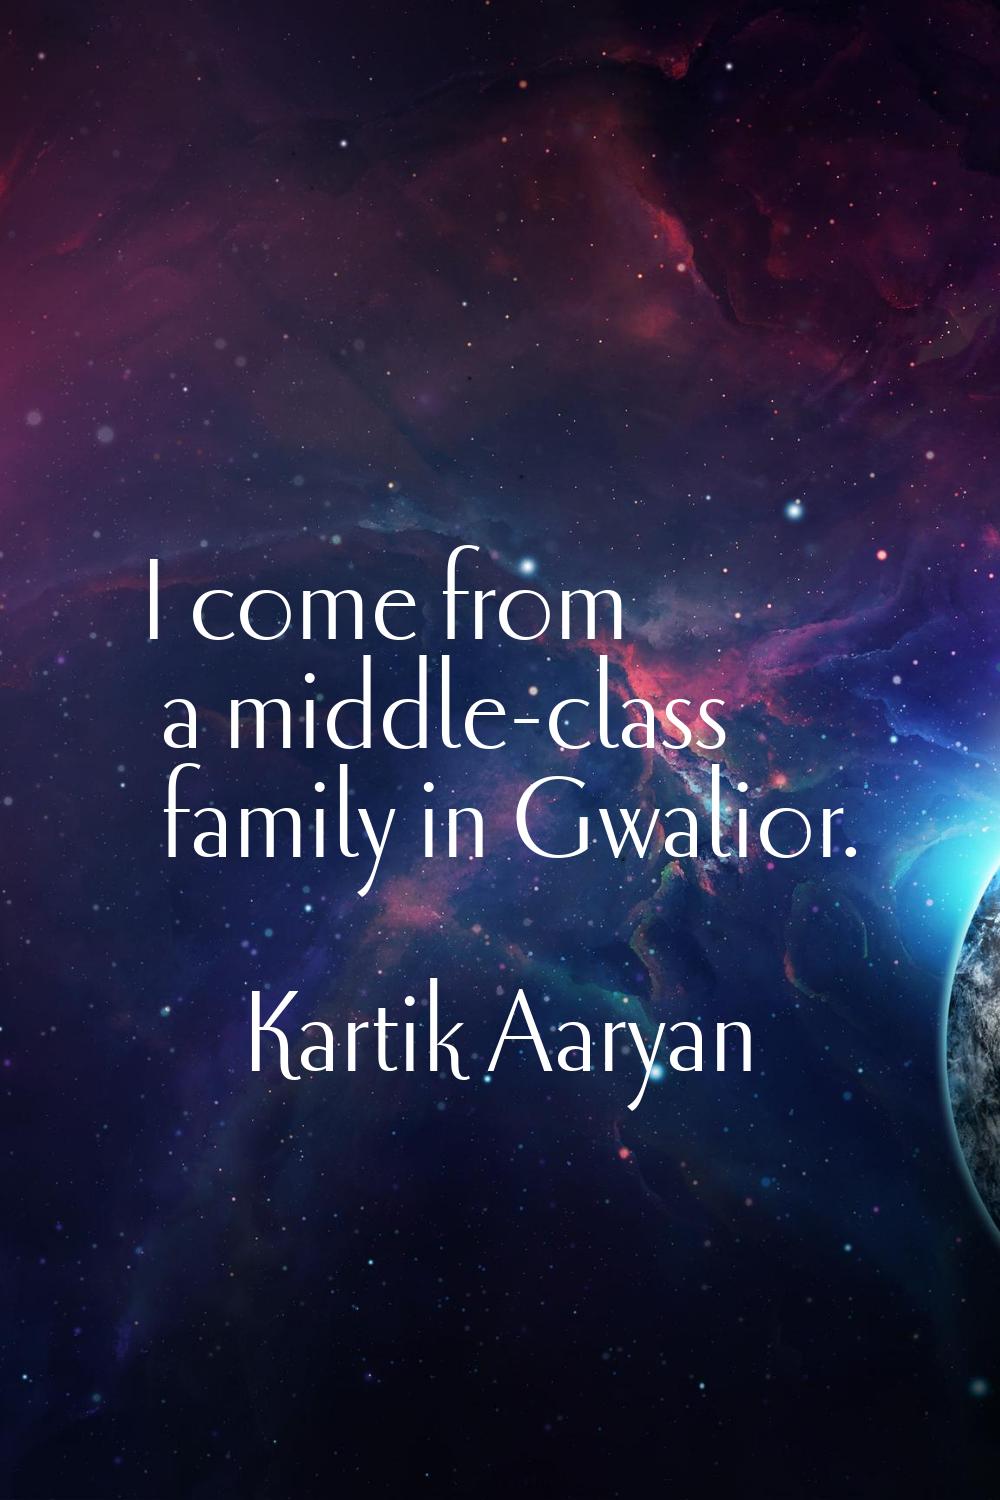 I come from a middle-class family in Gwalior.